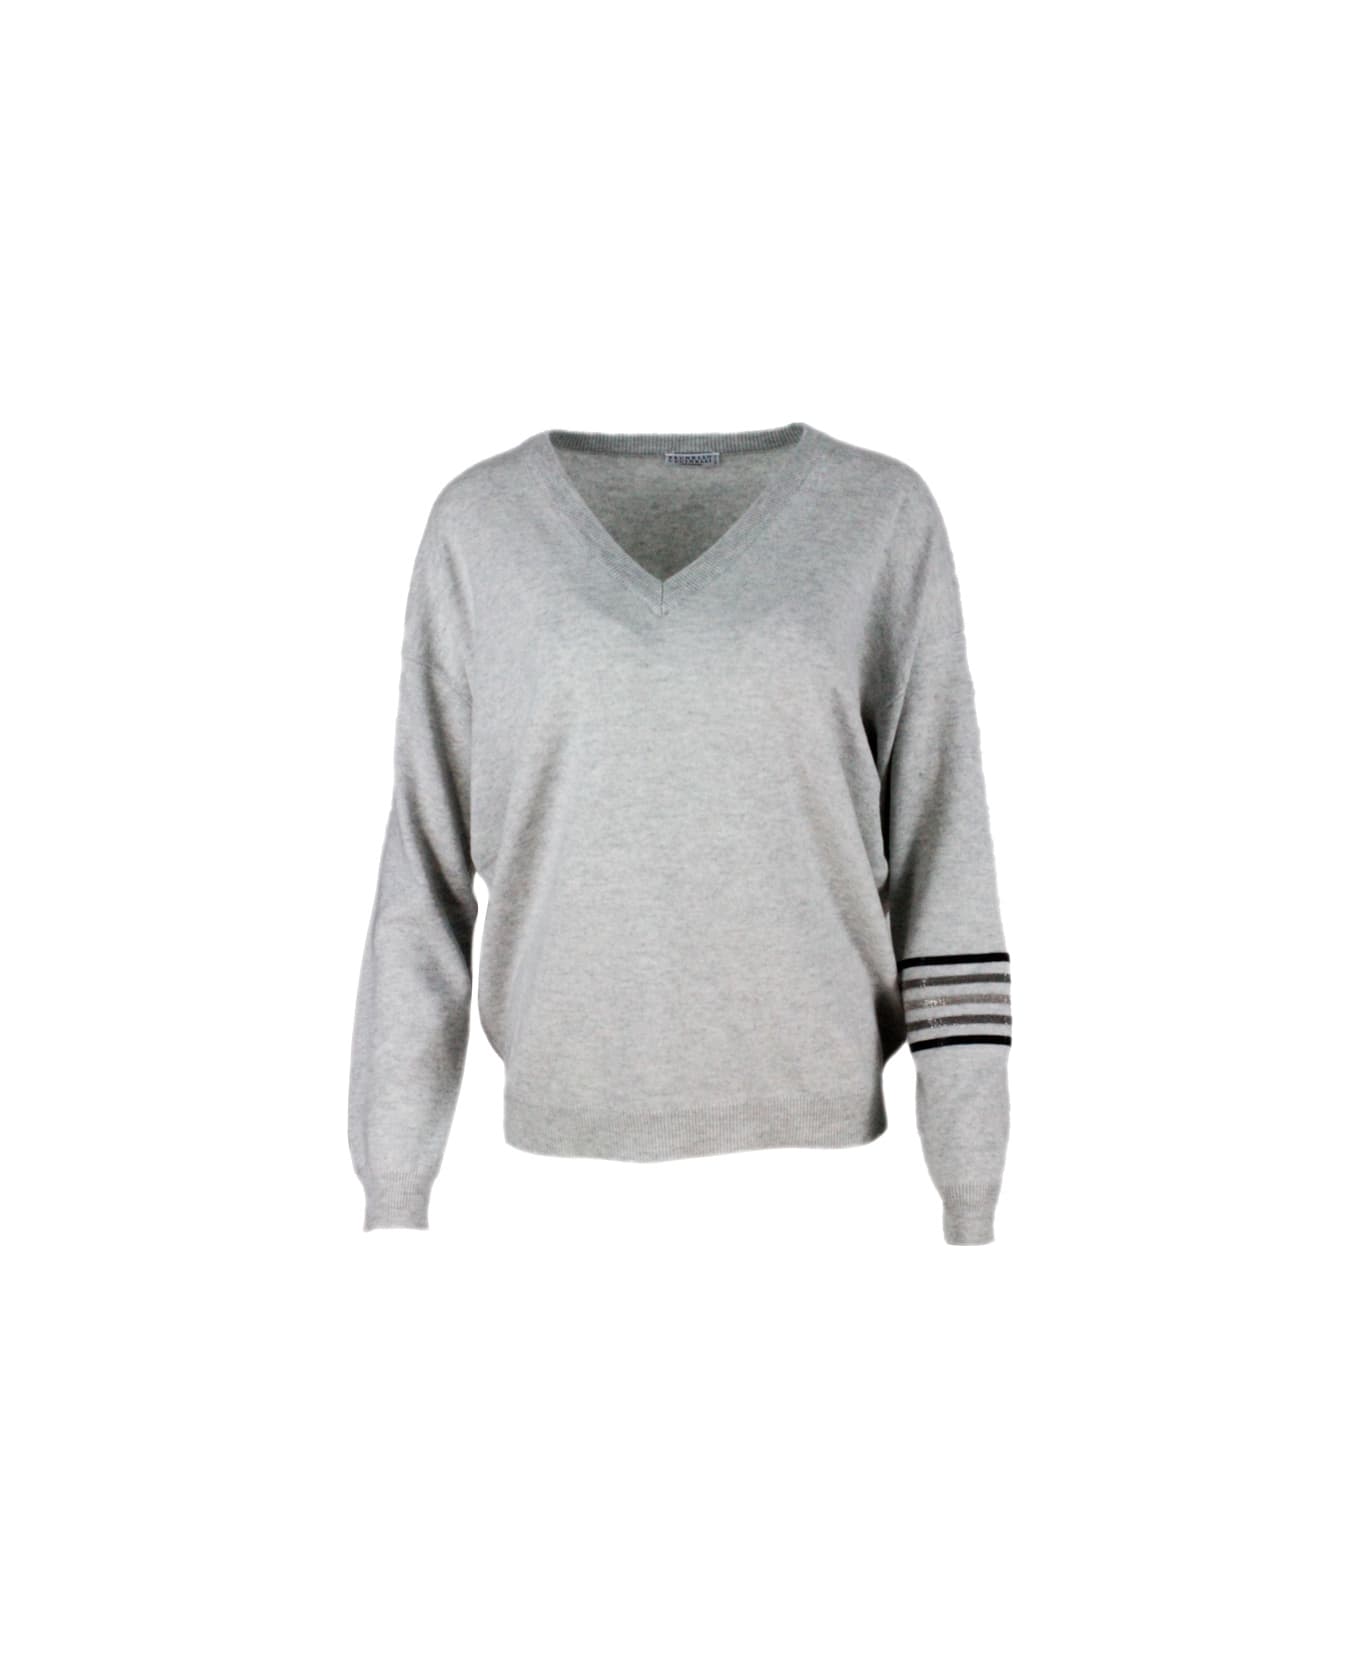 Brunello Cucinelli Cashmere V-neck Sweater With Rows Of Jewels On The Arm - Grey ニットウェア